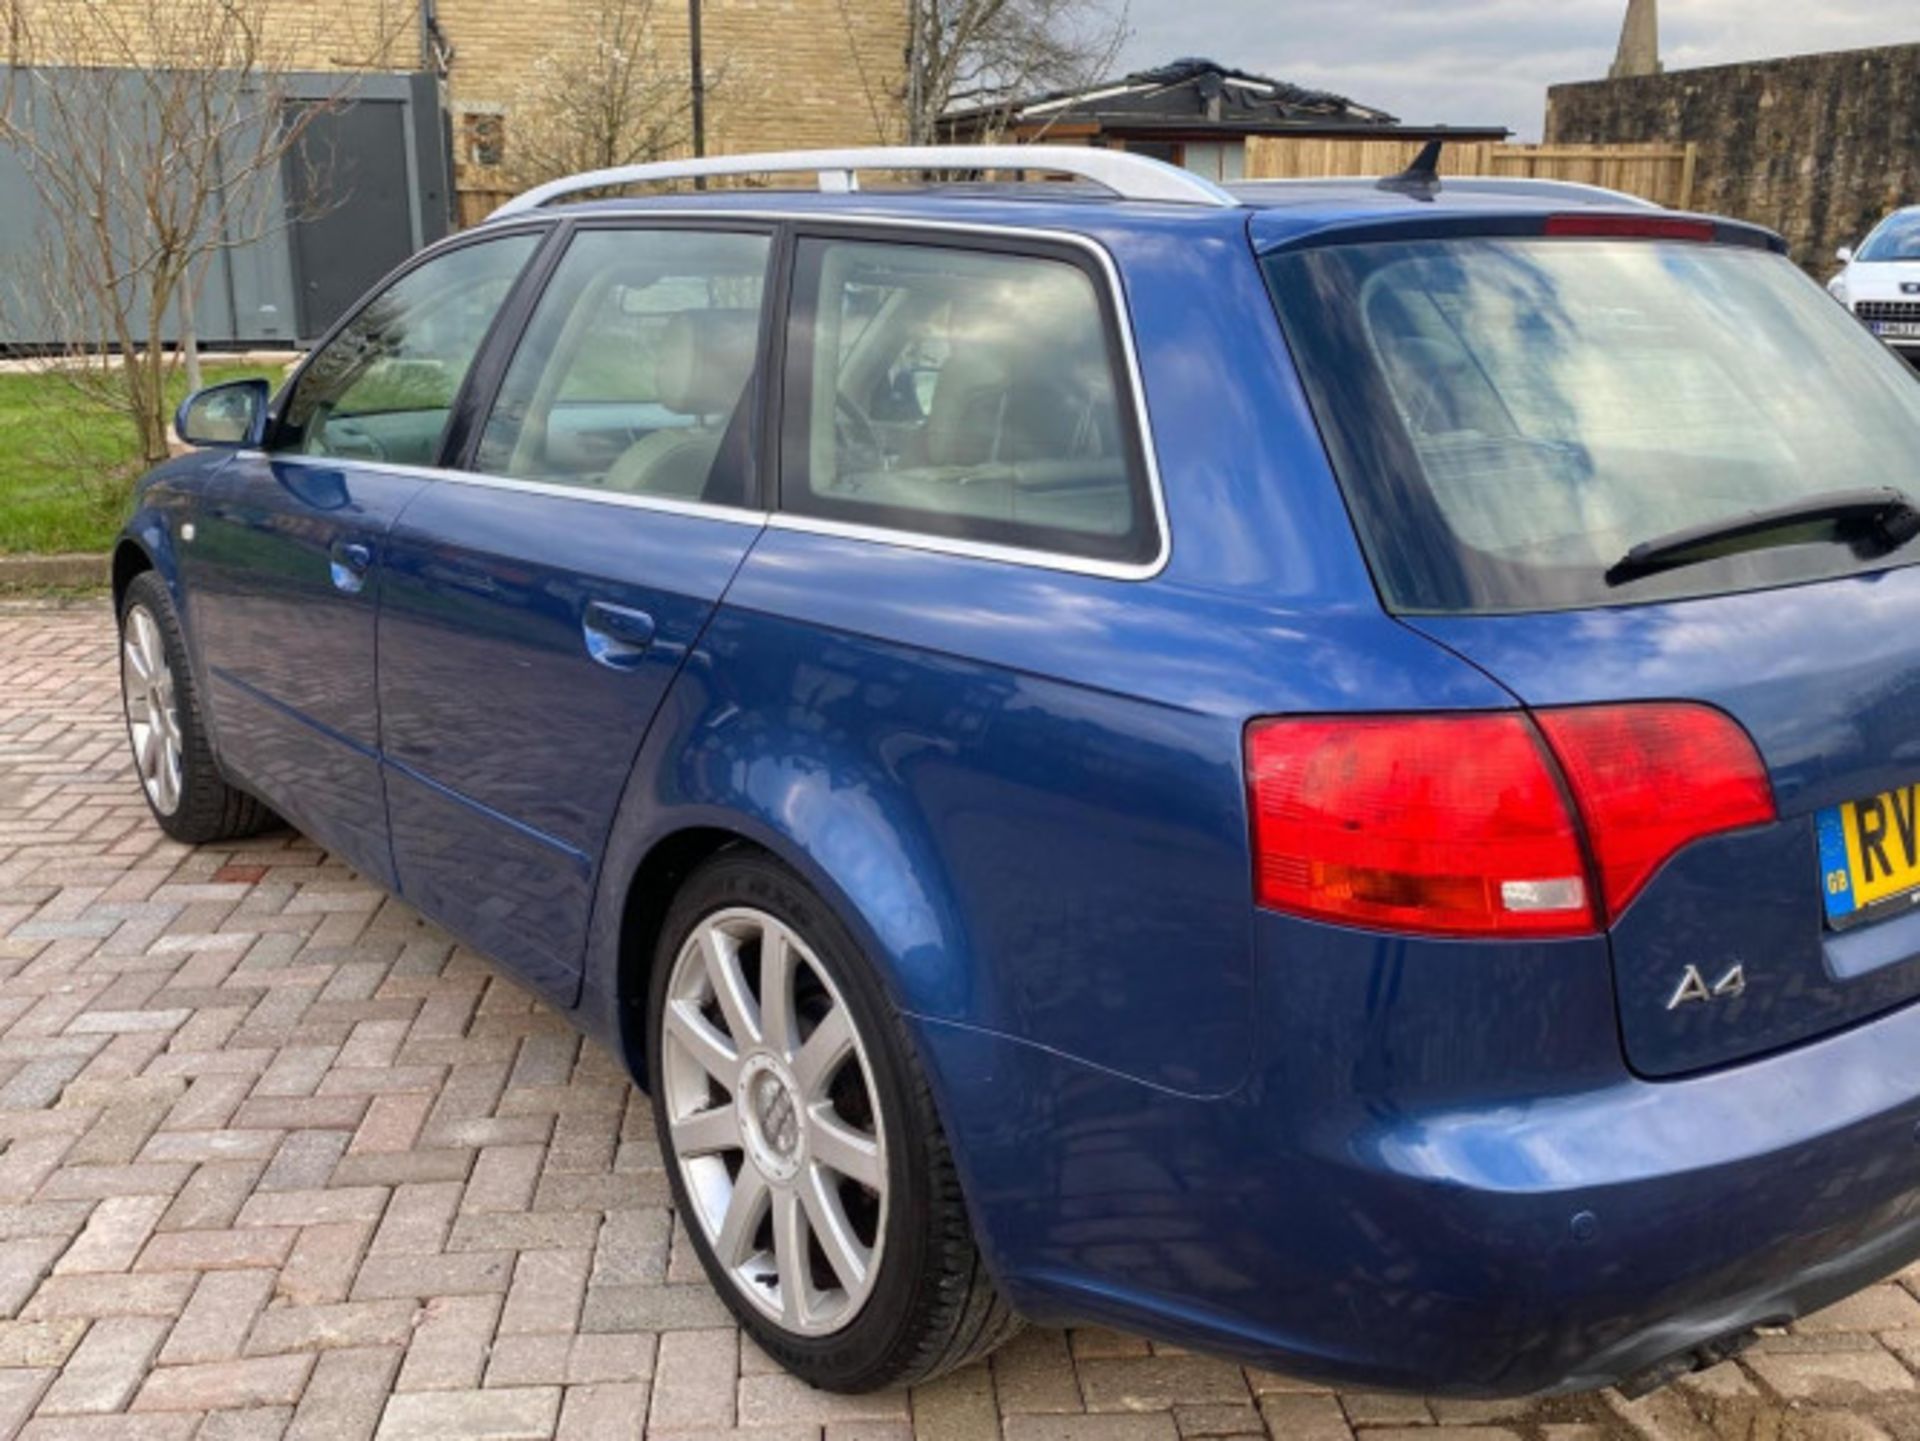 AUDI A4 AVANT 1.9 TDI SE 5DR ESTATE - RARE AND RELIABLE LUXURY WAGON >>--NO VAT ON HAMMER--<< - Image 54 of 63